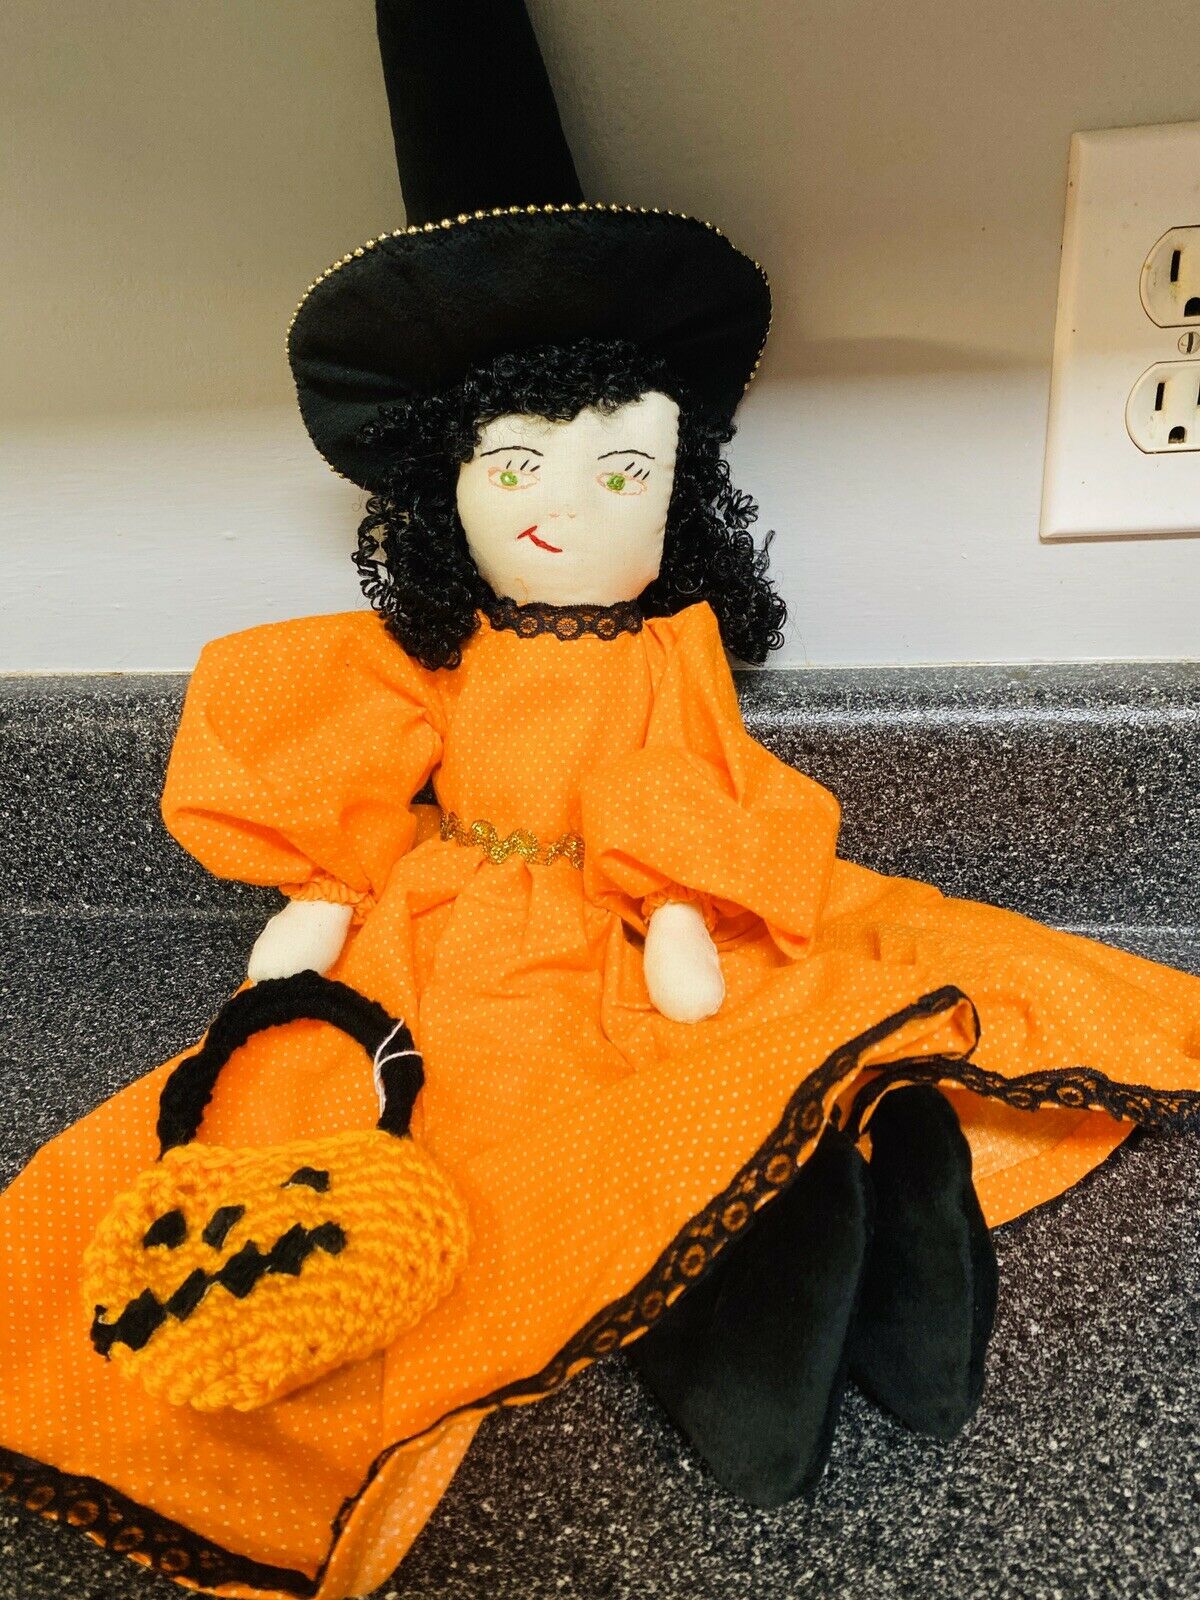 Vintage 70’s Halloween Handcrafted Muslin Embroided Face Witch Doll 23" Tall